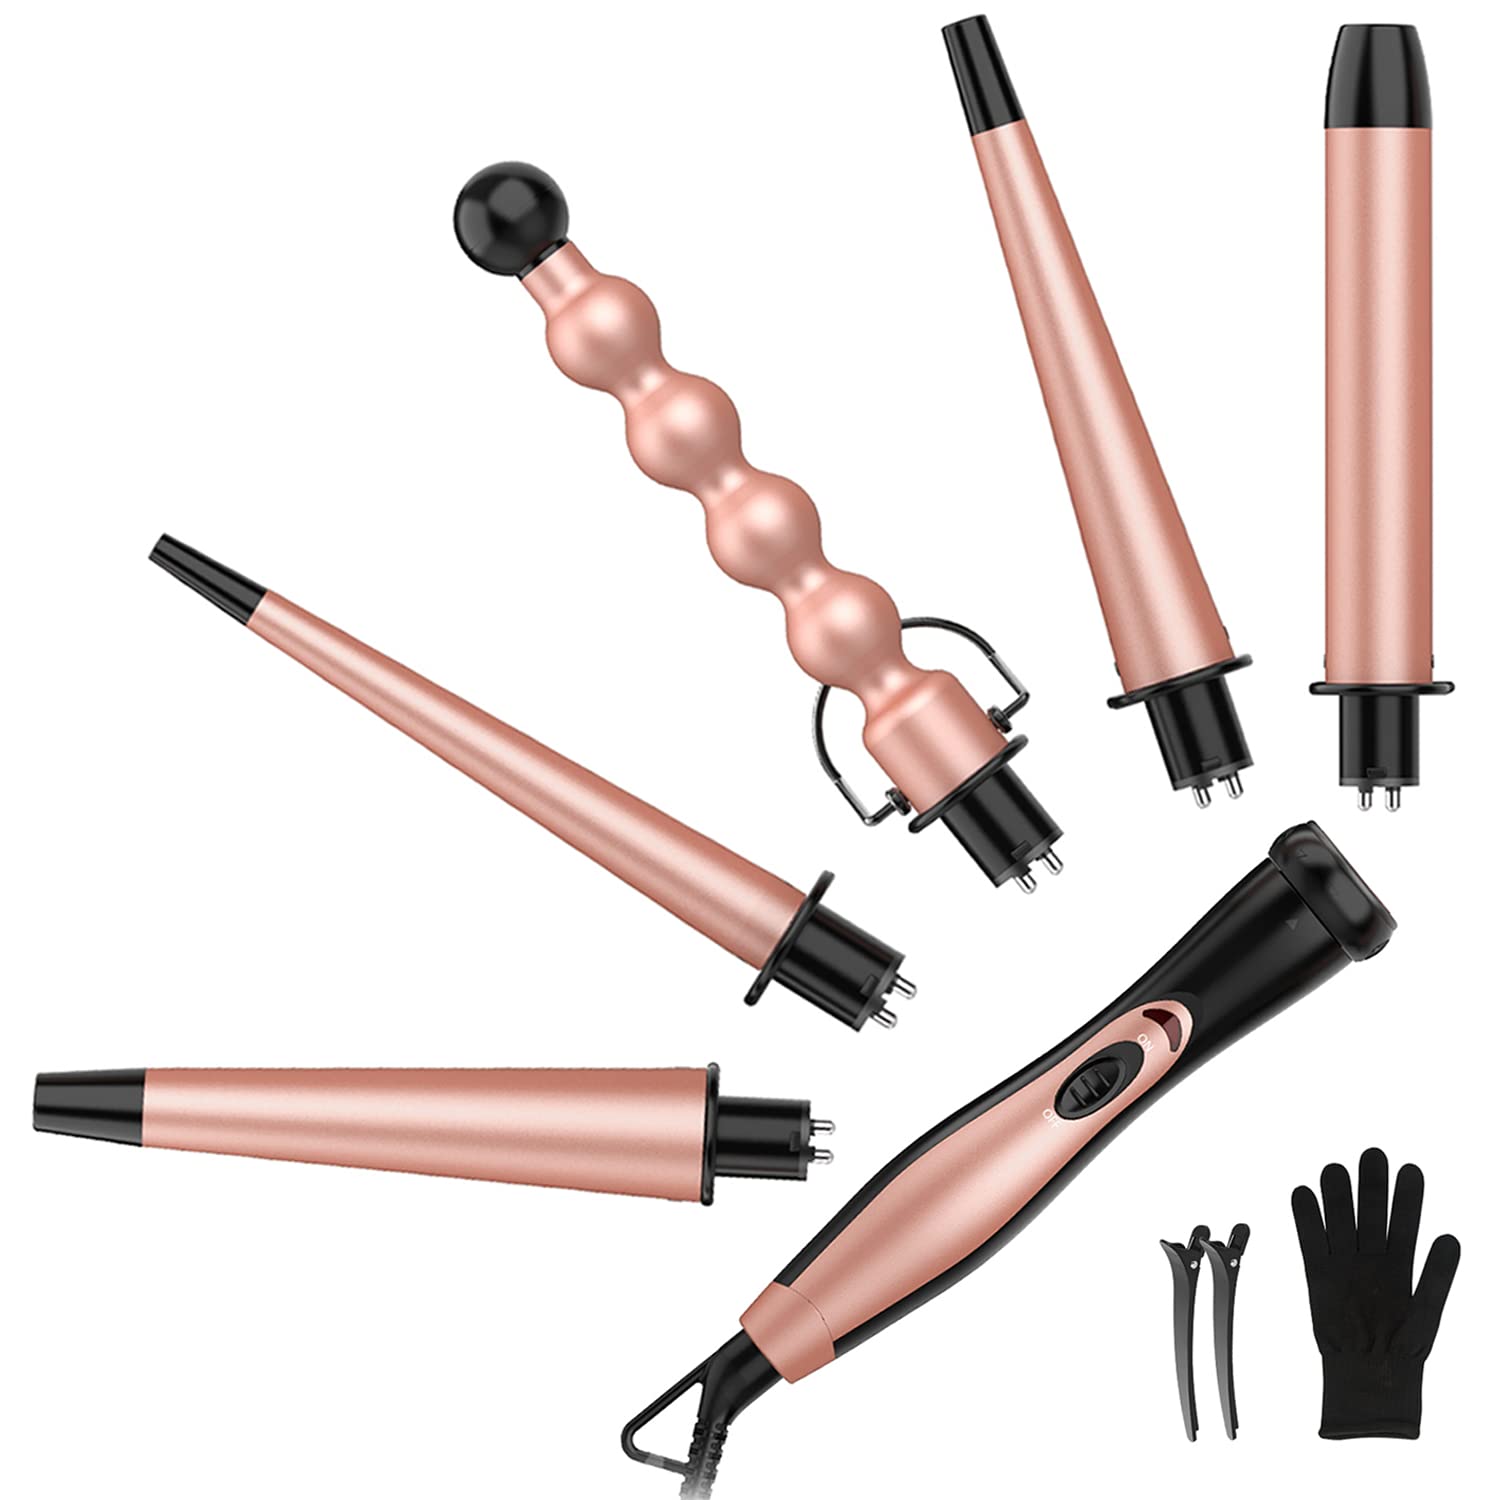 5 in 1 Curling Iron Set - BESTOPE PRO Curling Wand [...]